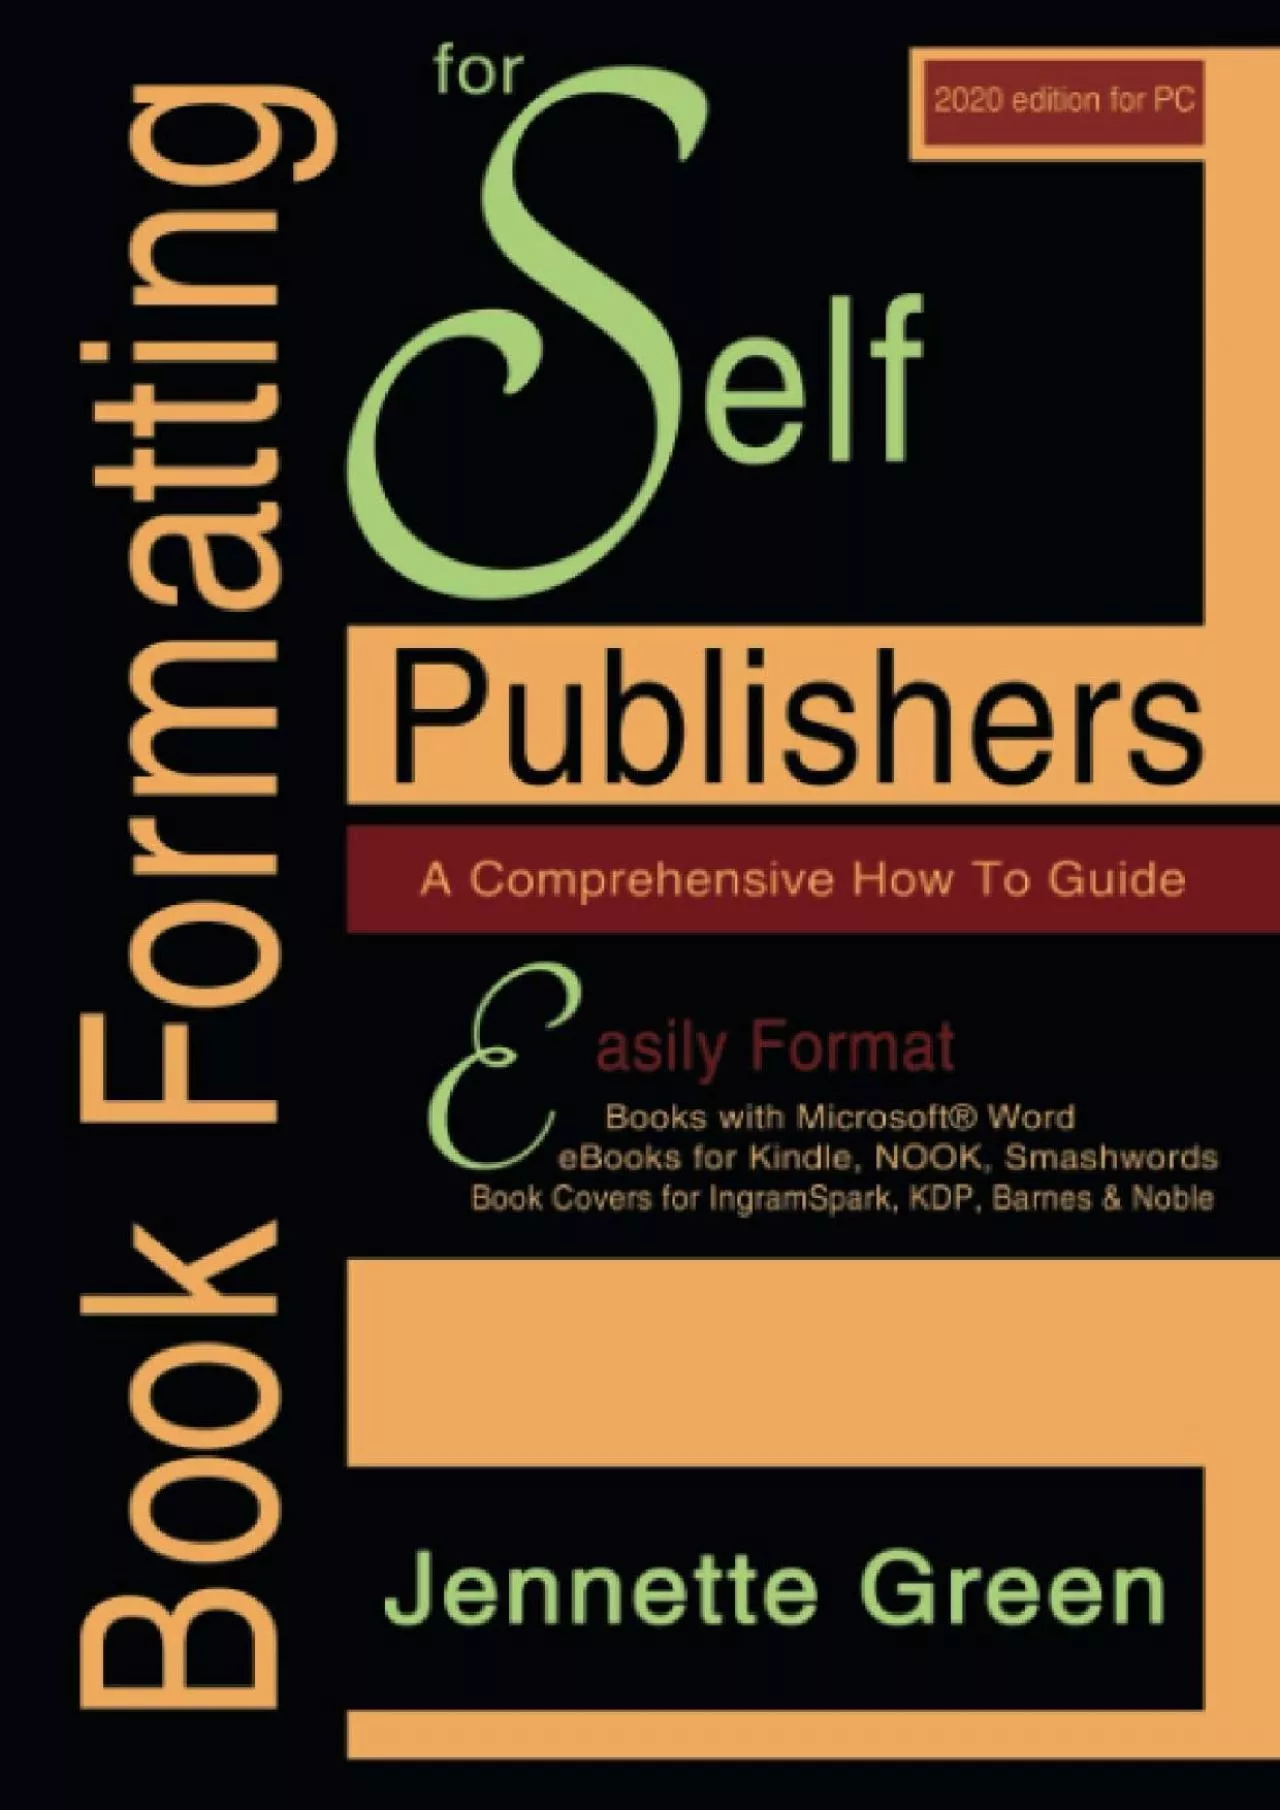 (BOOS)-Book Formatting for Self-Publishers, a Comprehensive How to Guide (2020 Edition